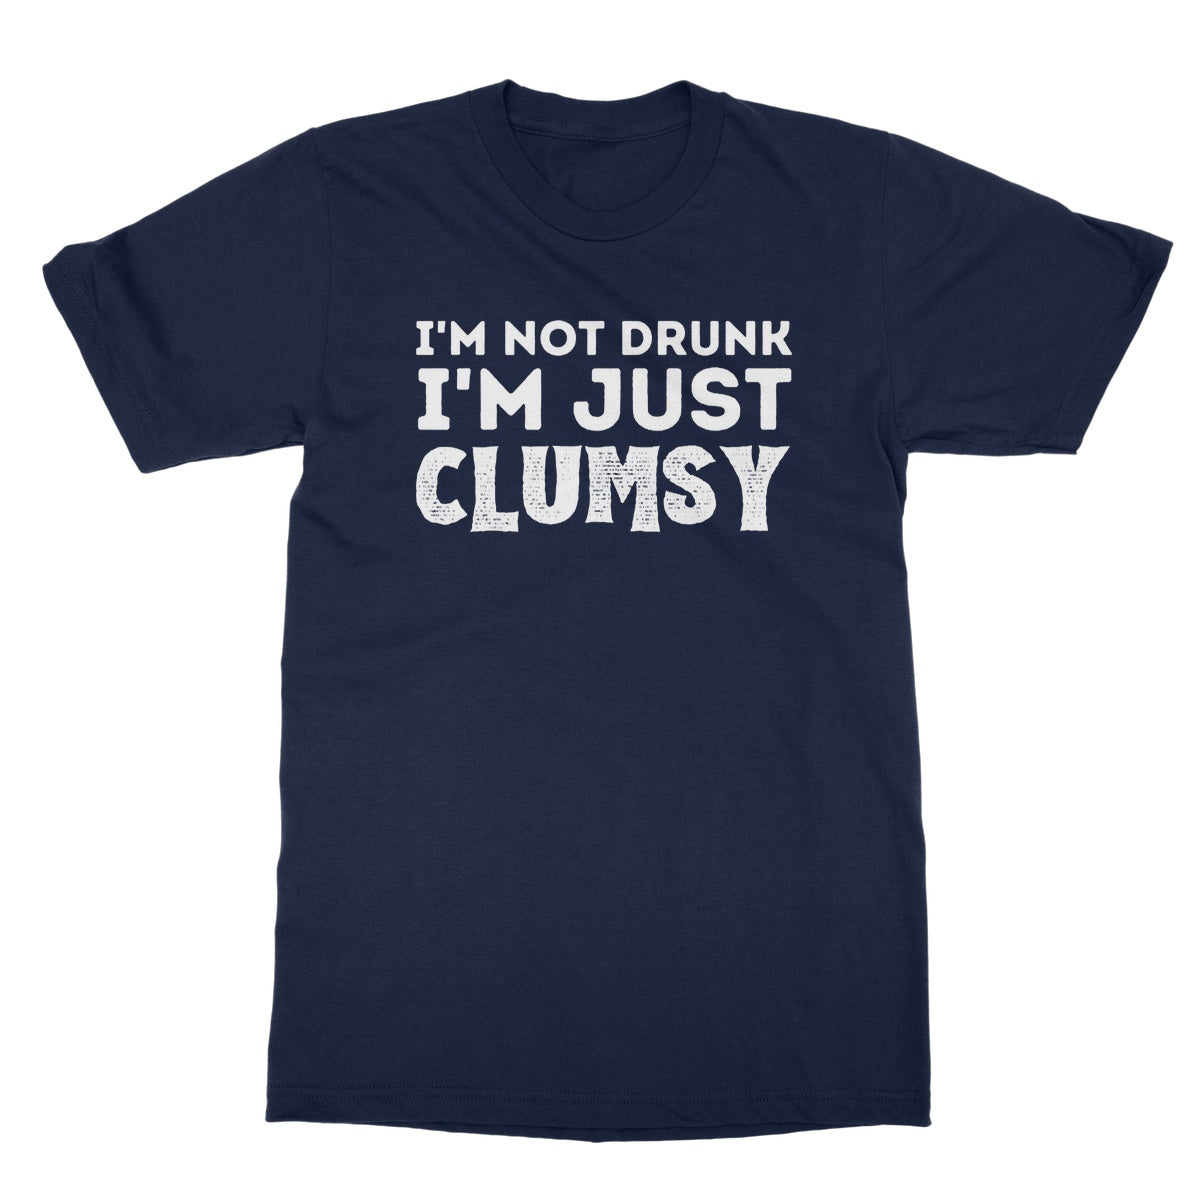 I'm not drunk I'm just clumsy t shirt navy